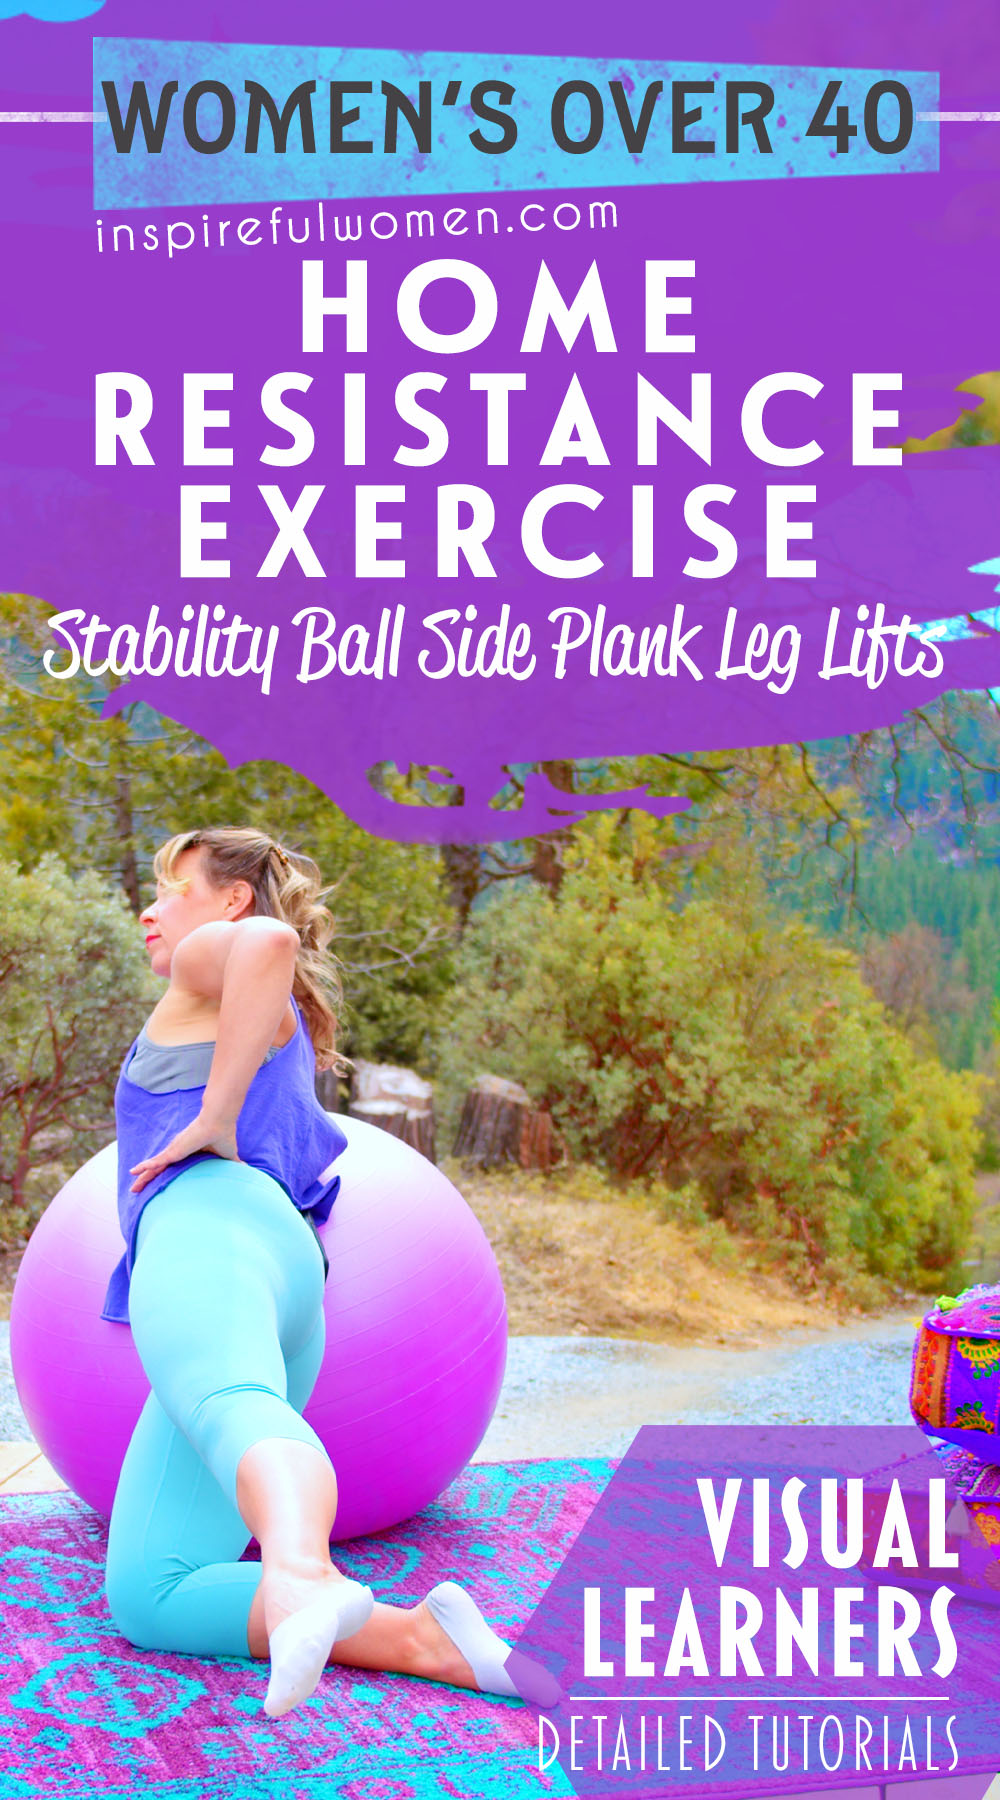 stability-ball-side-plank-leg-lifts-glutes-resistance-exercise-at-home-women-over-40